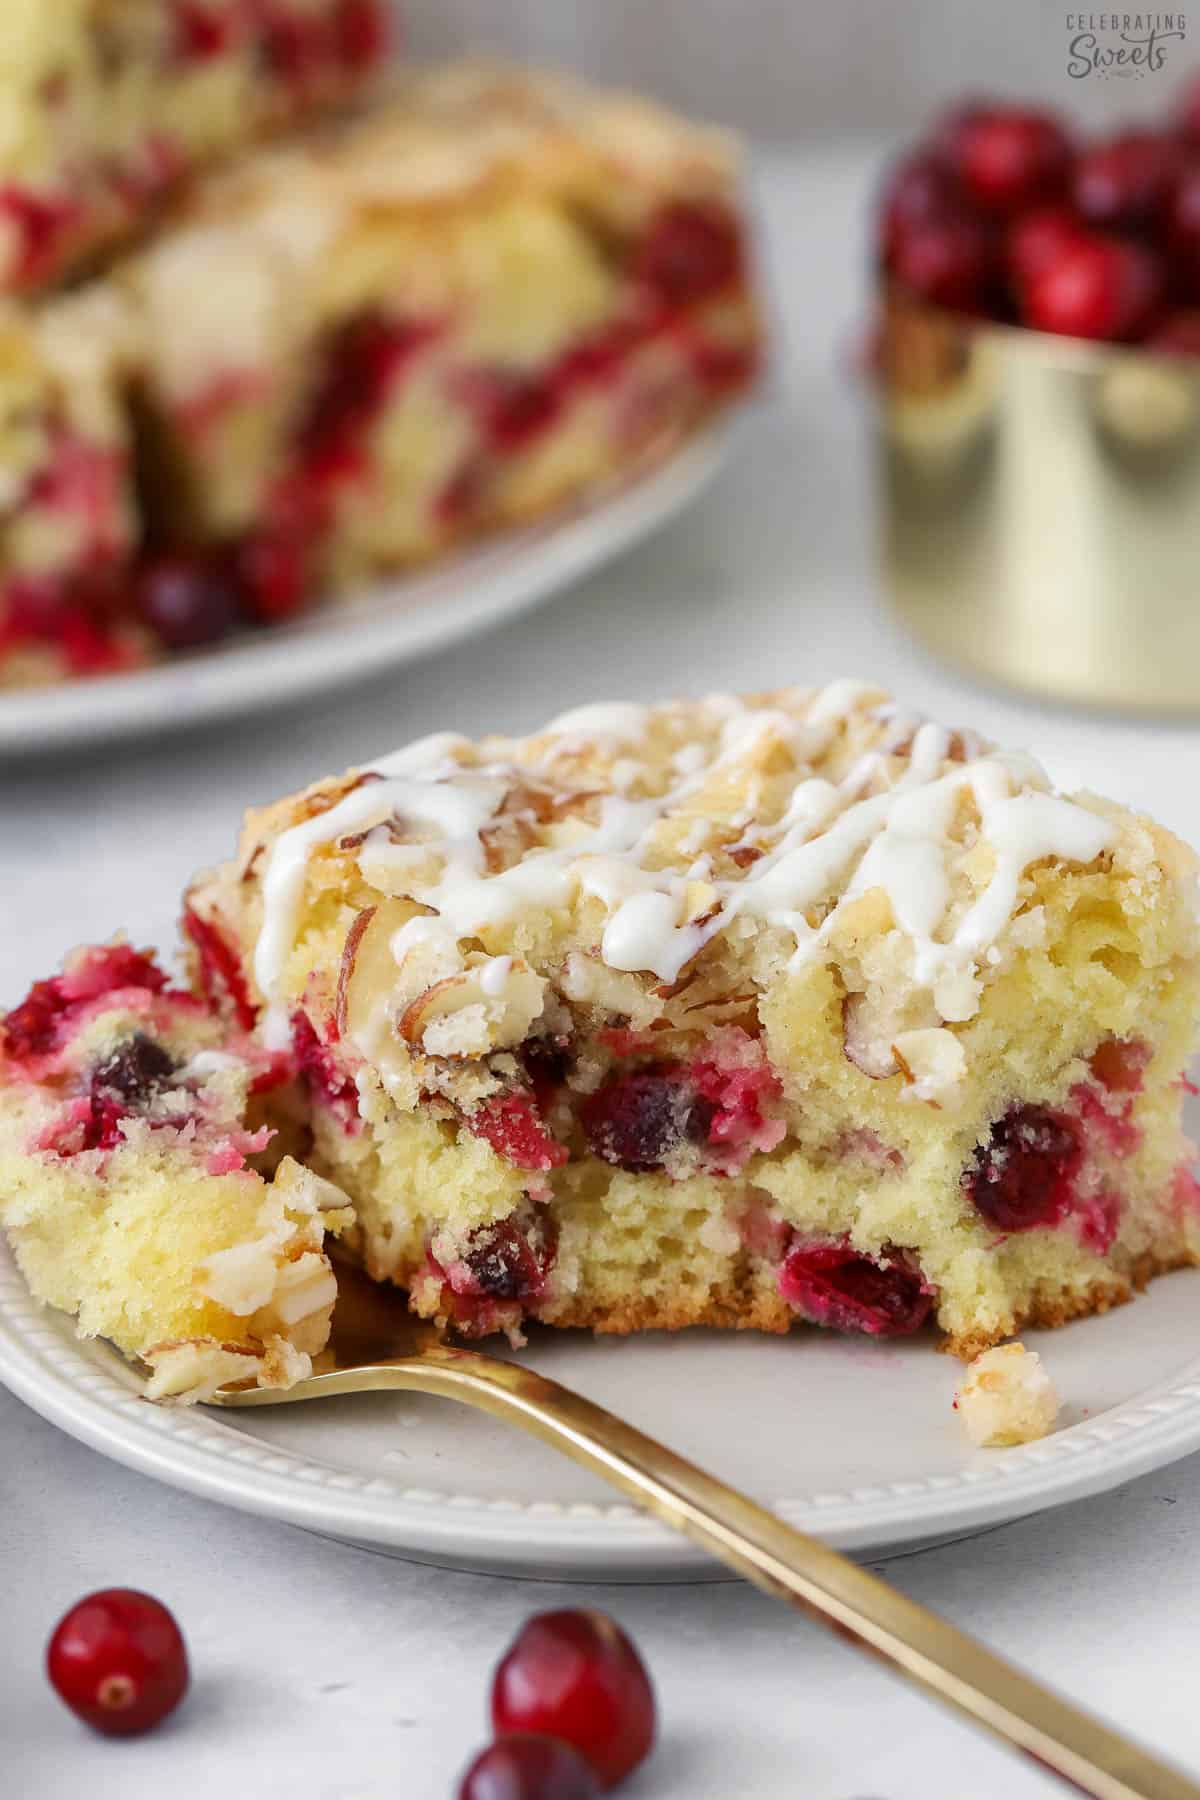 Slice of cranberry cake on a plate with a gold fork.